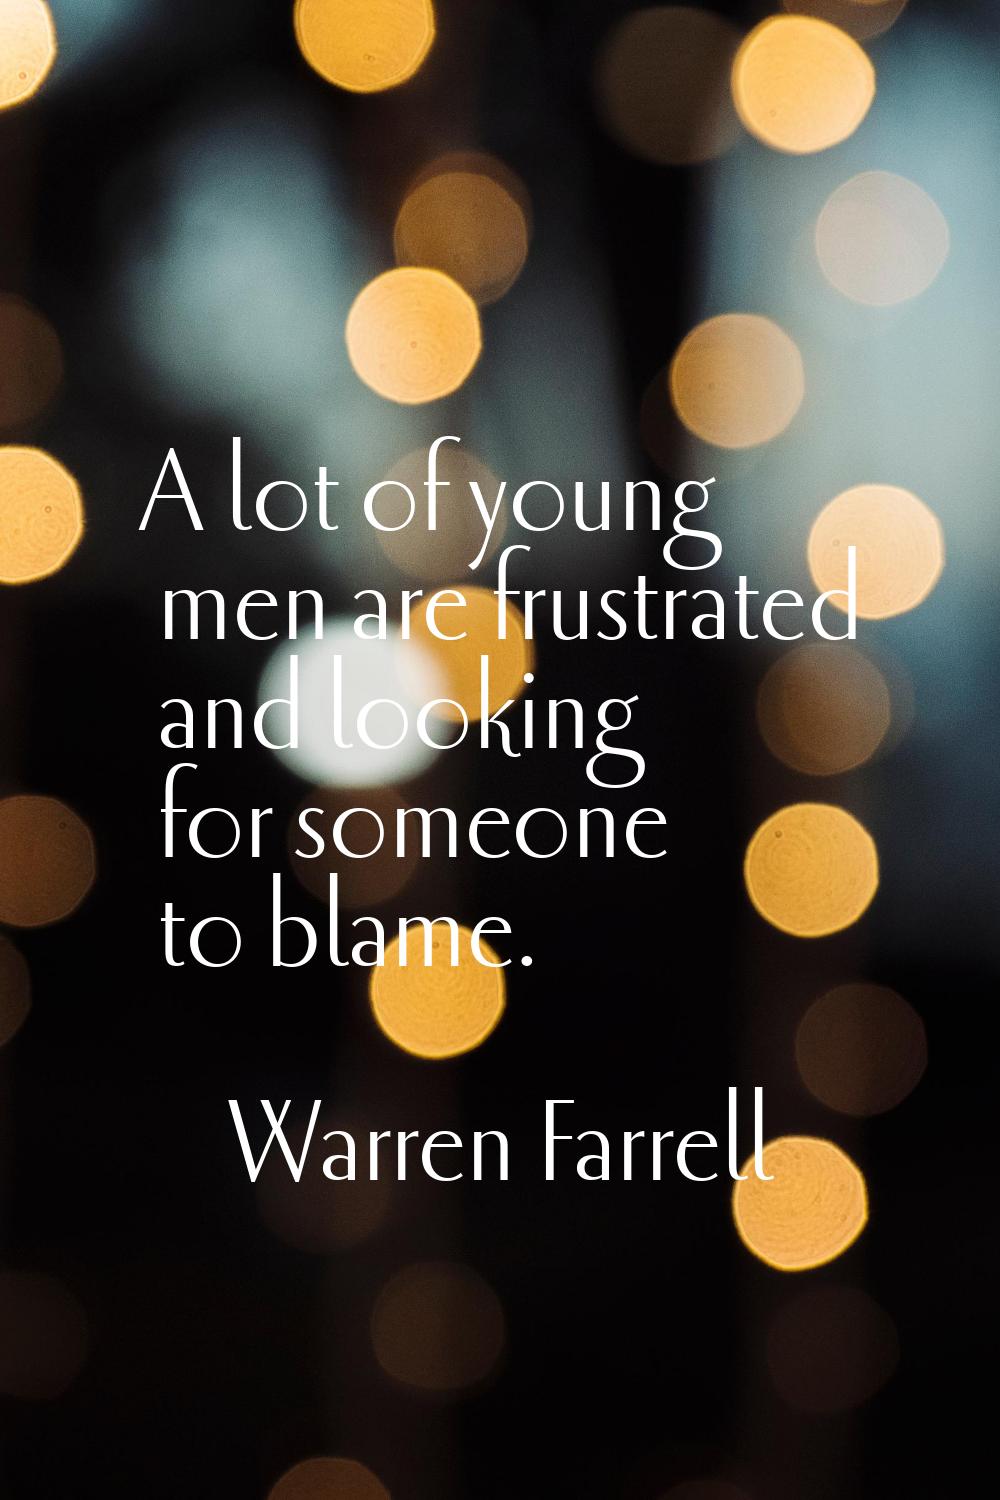 A lot of young men are frustrated and looking for someone to blame.